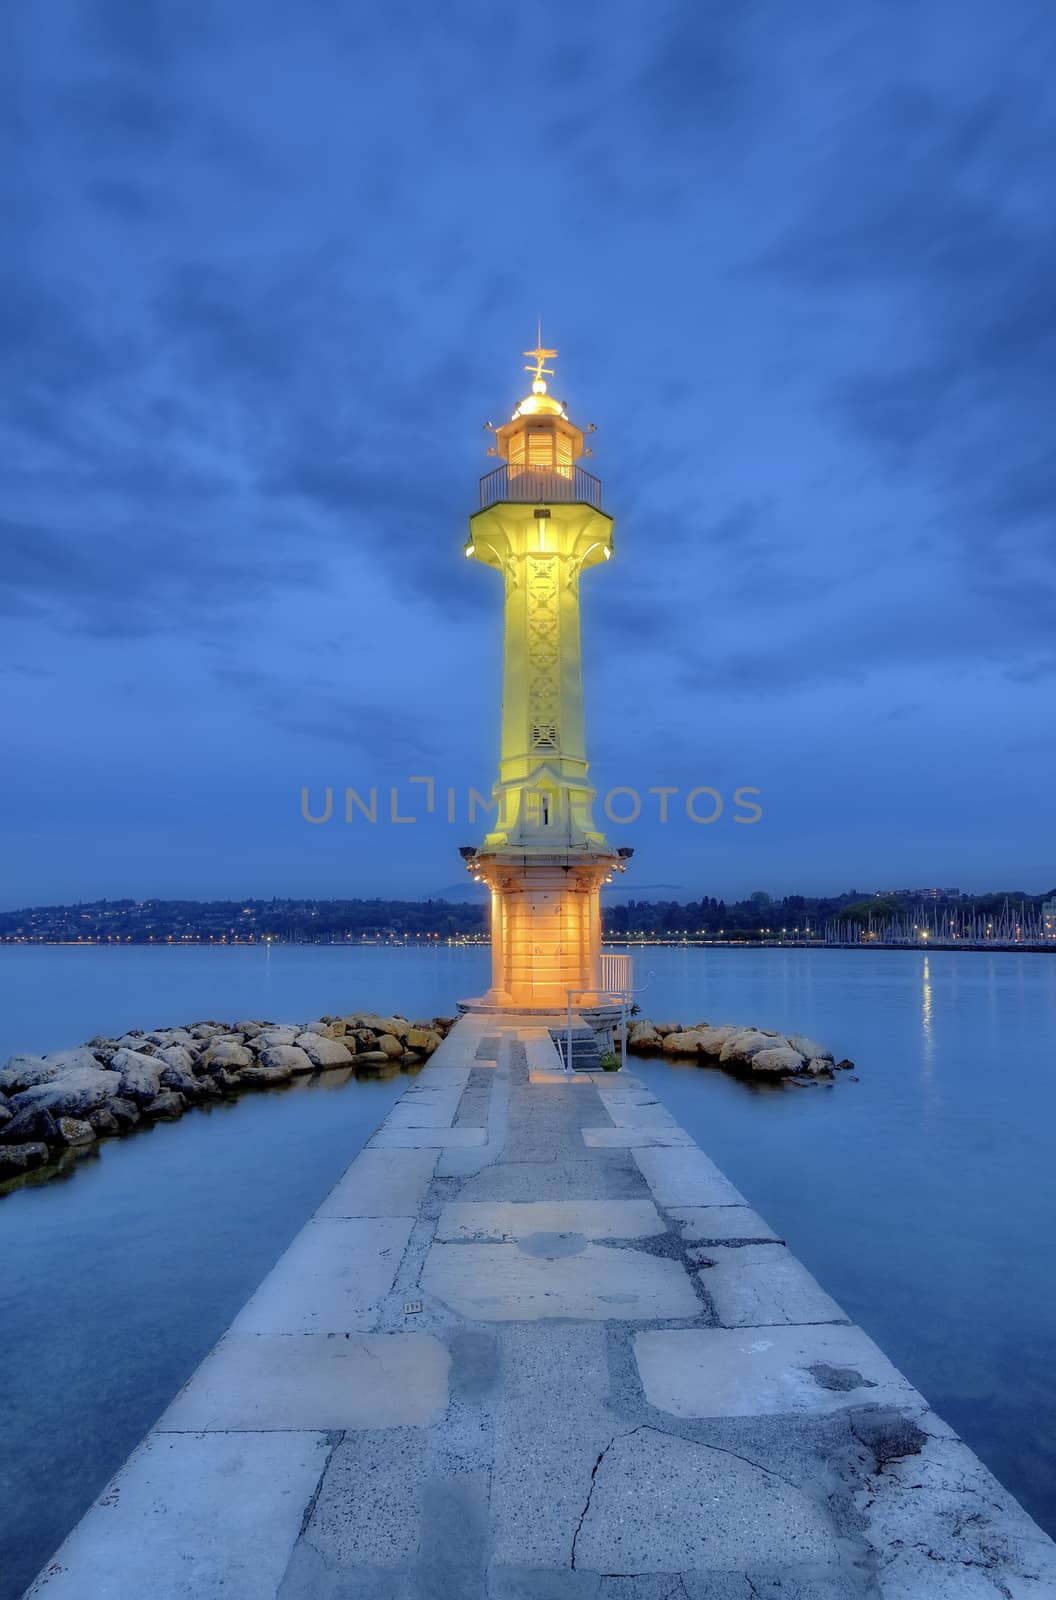 Lighthouse at the Paquis by night, Geneva, Switzerland, HDR